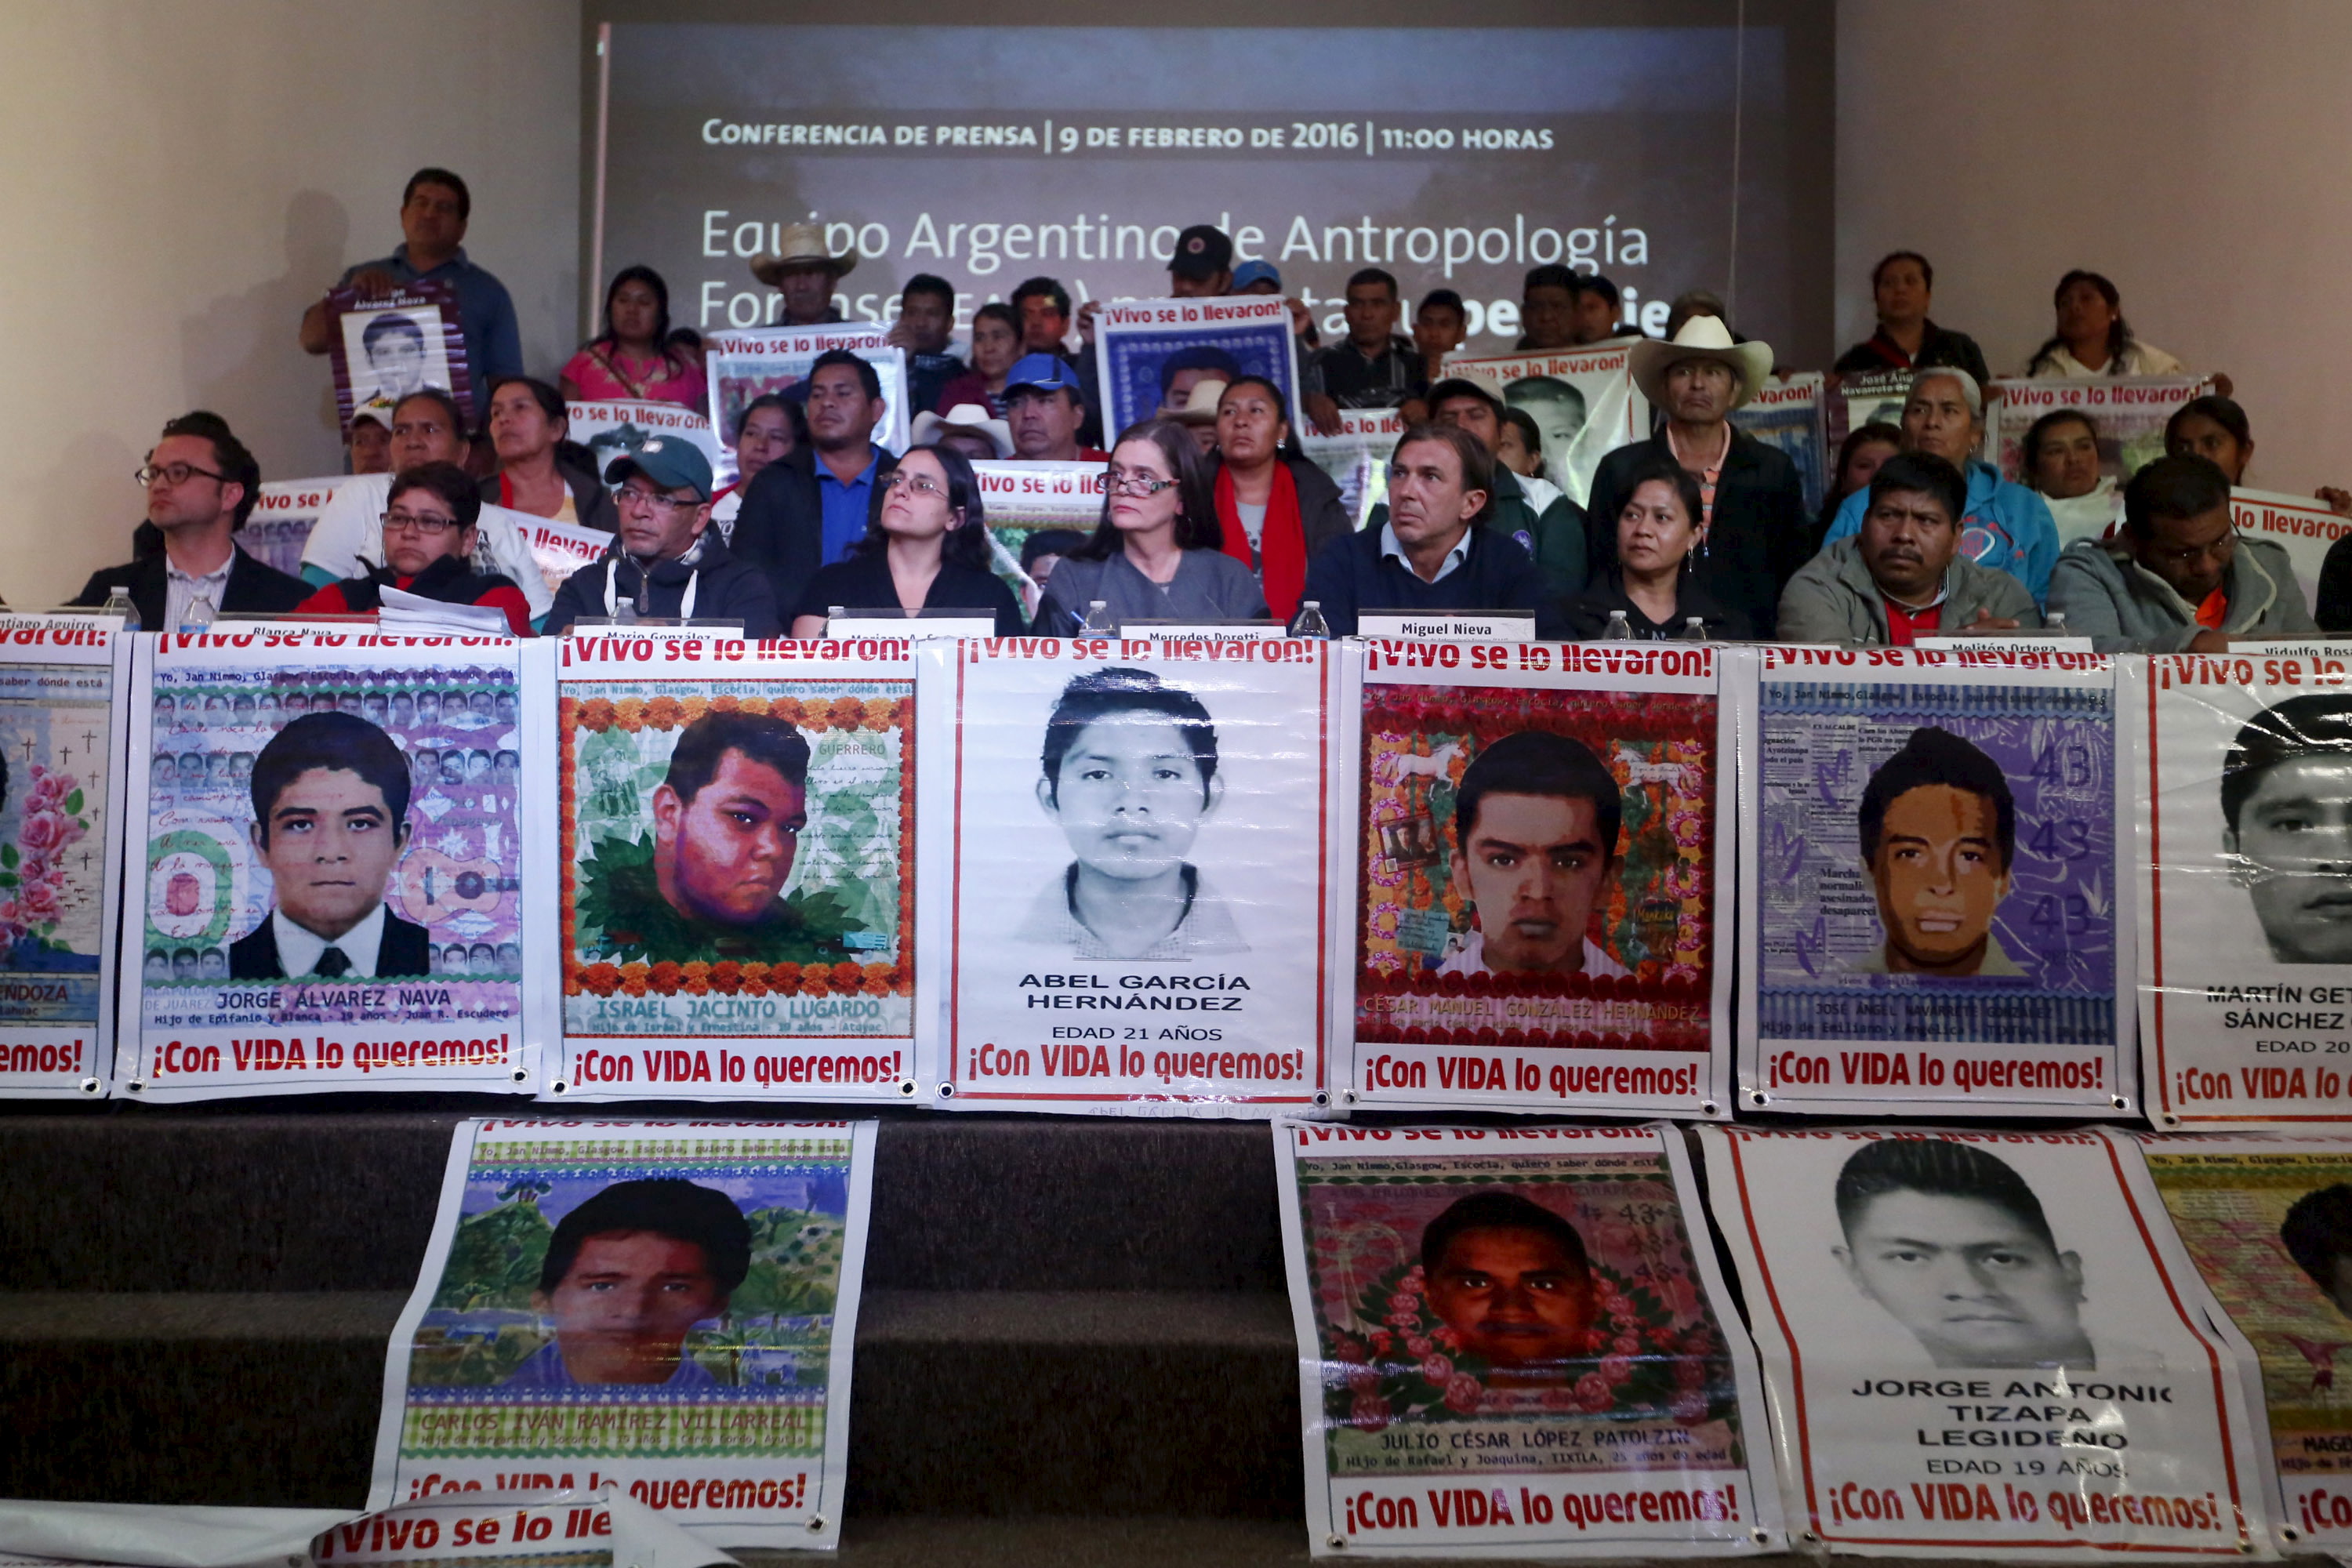 Members of the Argentine Team of Forensic Anthropology, relatives of the 43 students missing from Ayotzinapa College Raul Isidro Burgos and representatives of human rights organizations take part in a news conference in Mexico City